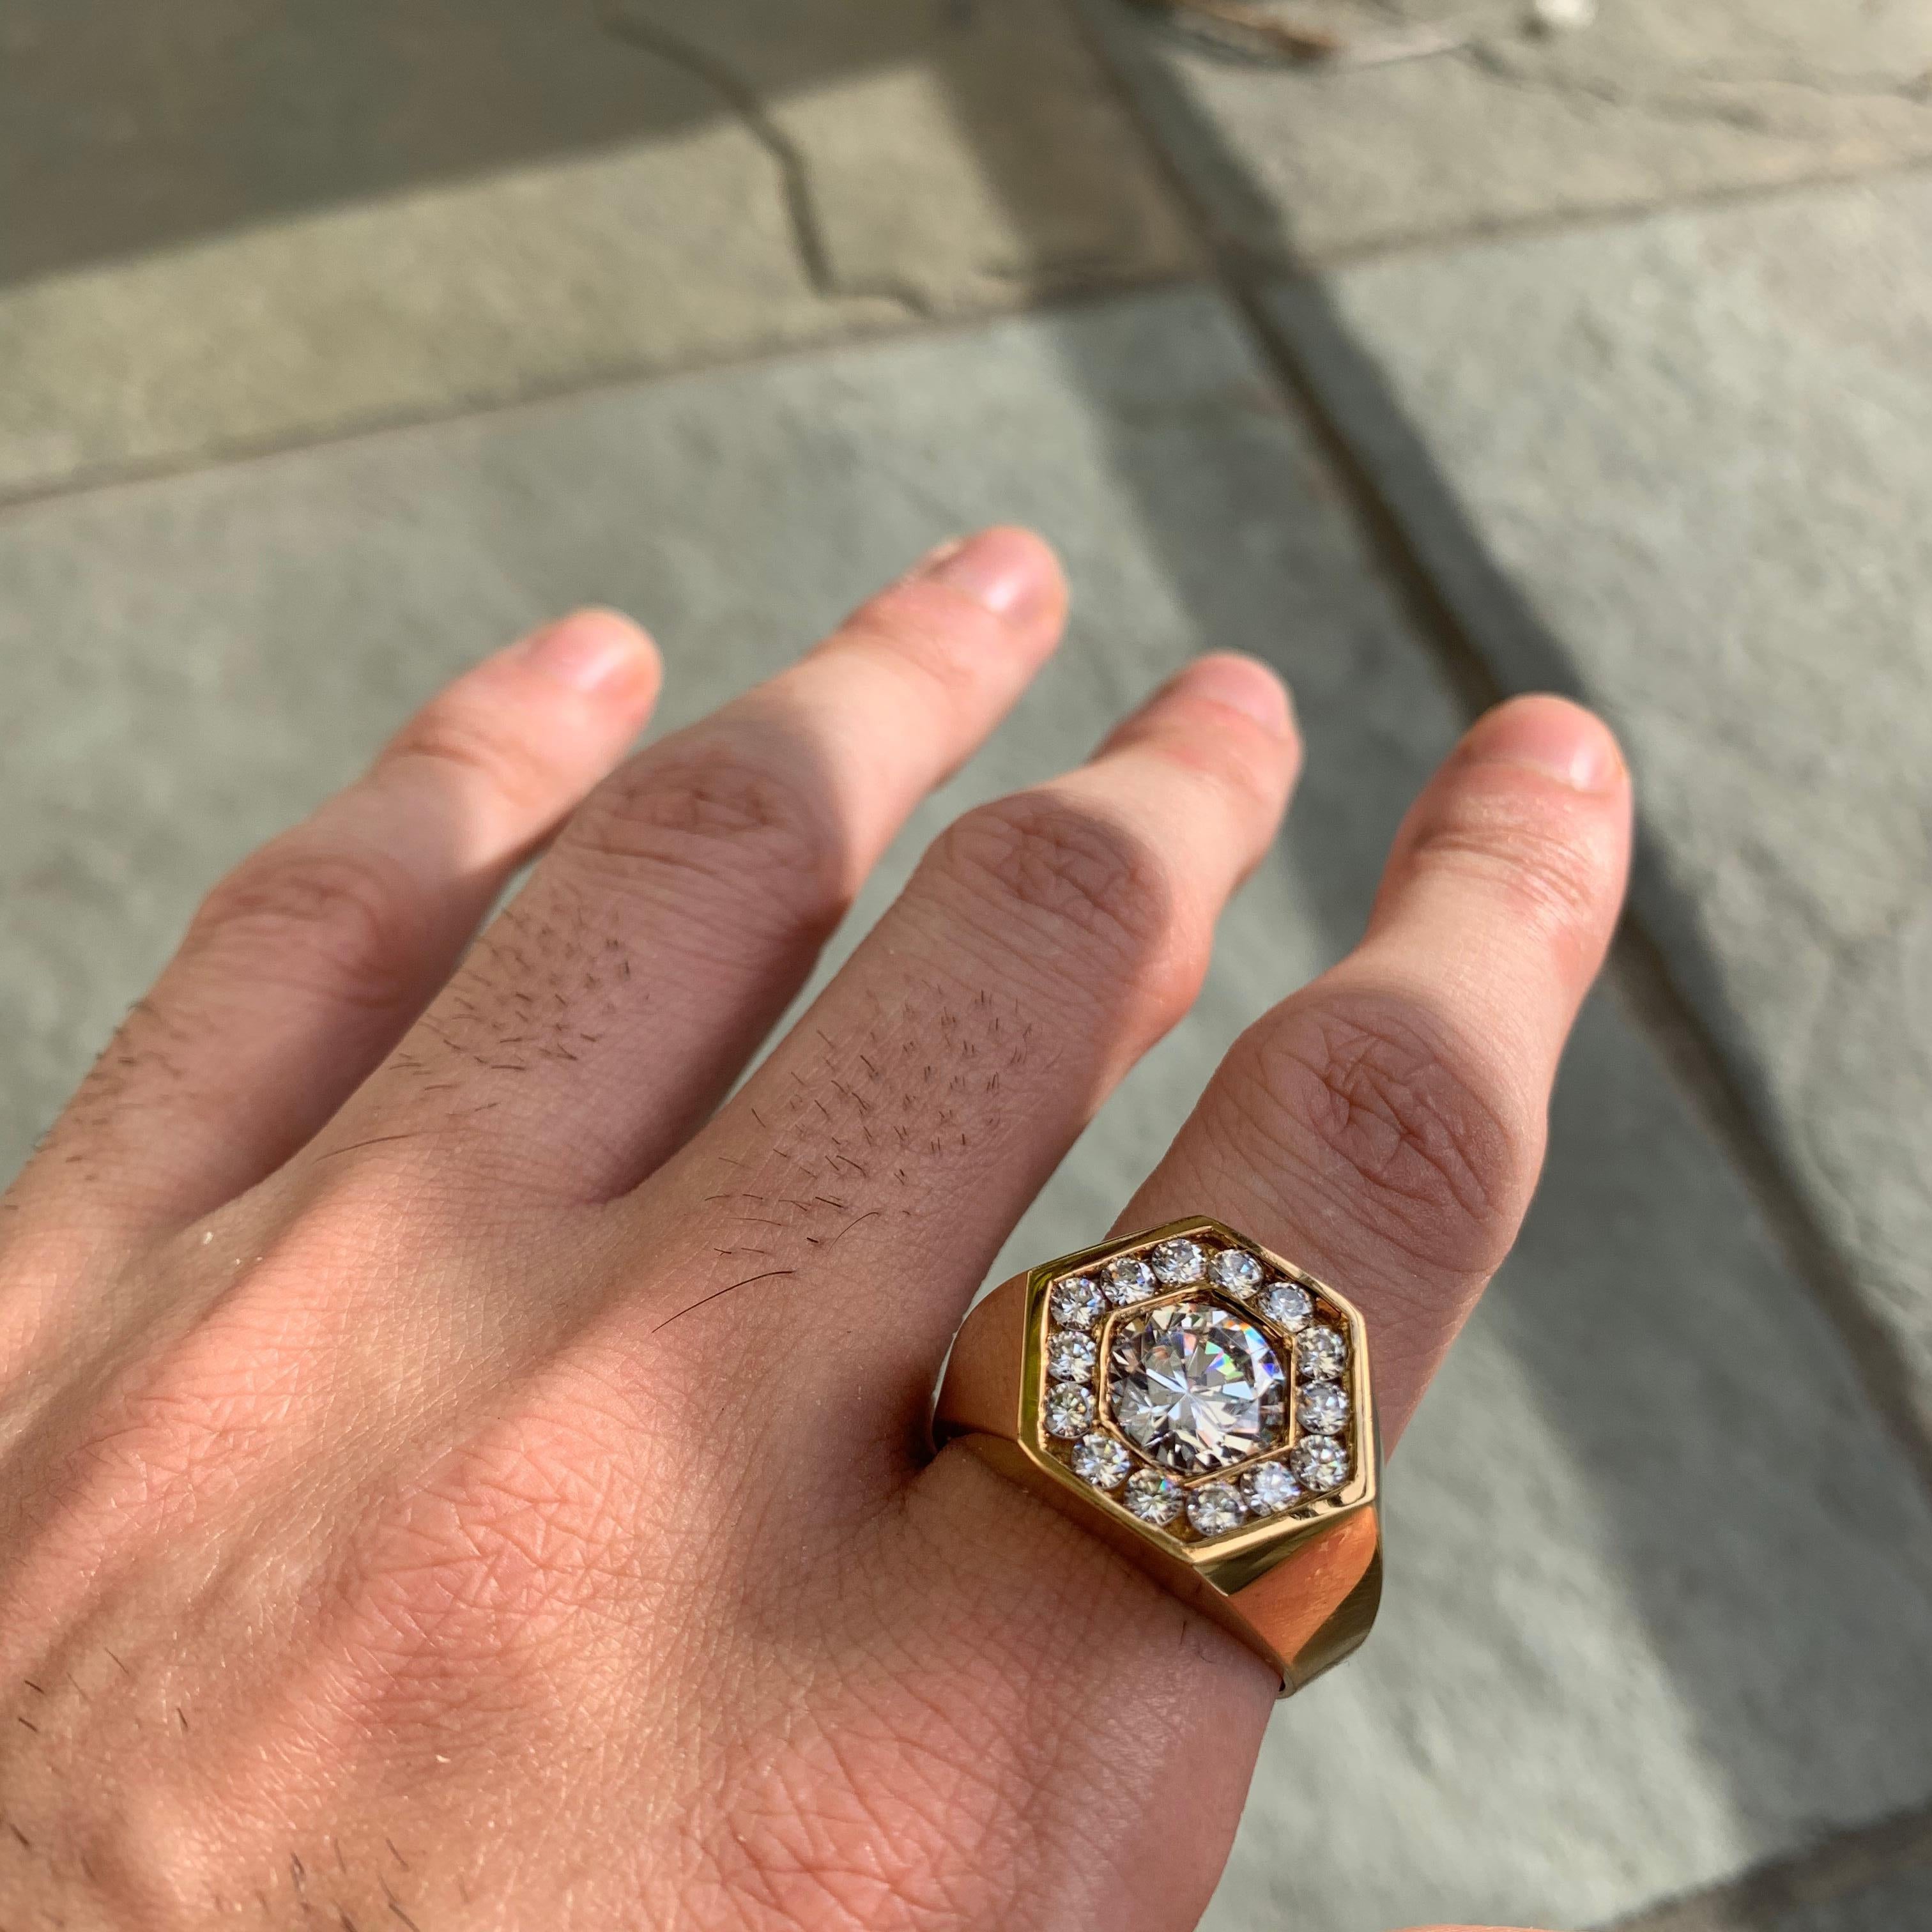 All Of Our Pieces Are 100% Made In Los Angeles, California.  

Want This Beautiful Diamond and Gold Ring But Want To Save Money? We Can Make You This Real Gold And Side Diamond Ring With A CZ Center Stone And Lower Your Cost To  $5400.00

If Item Is